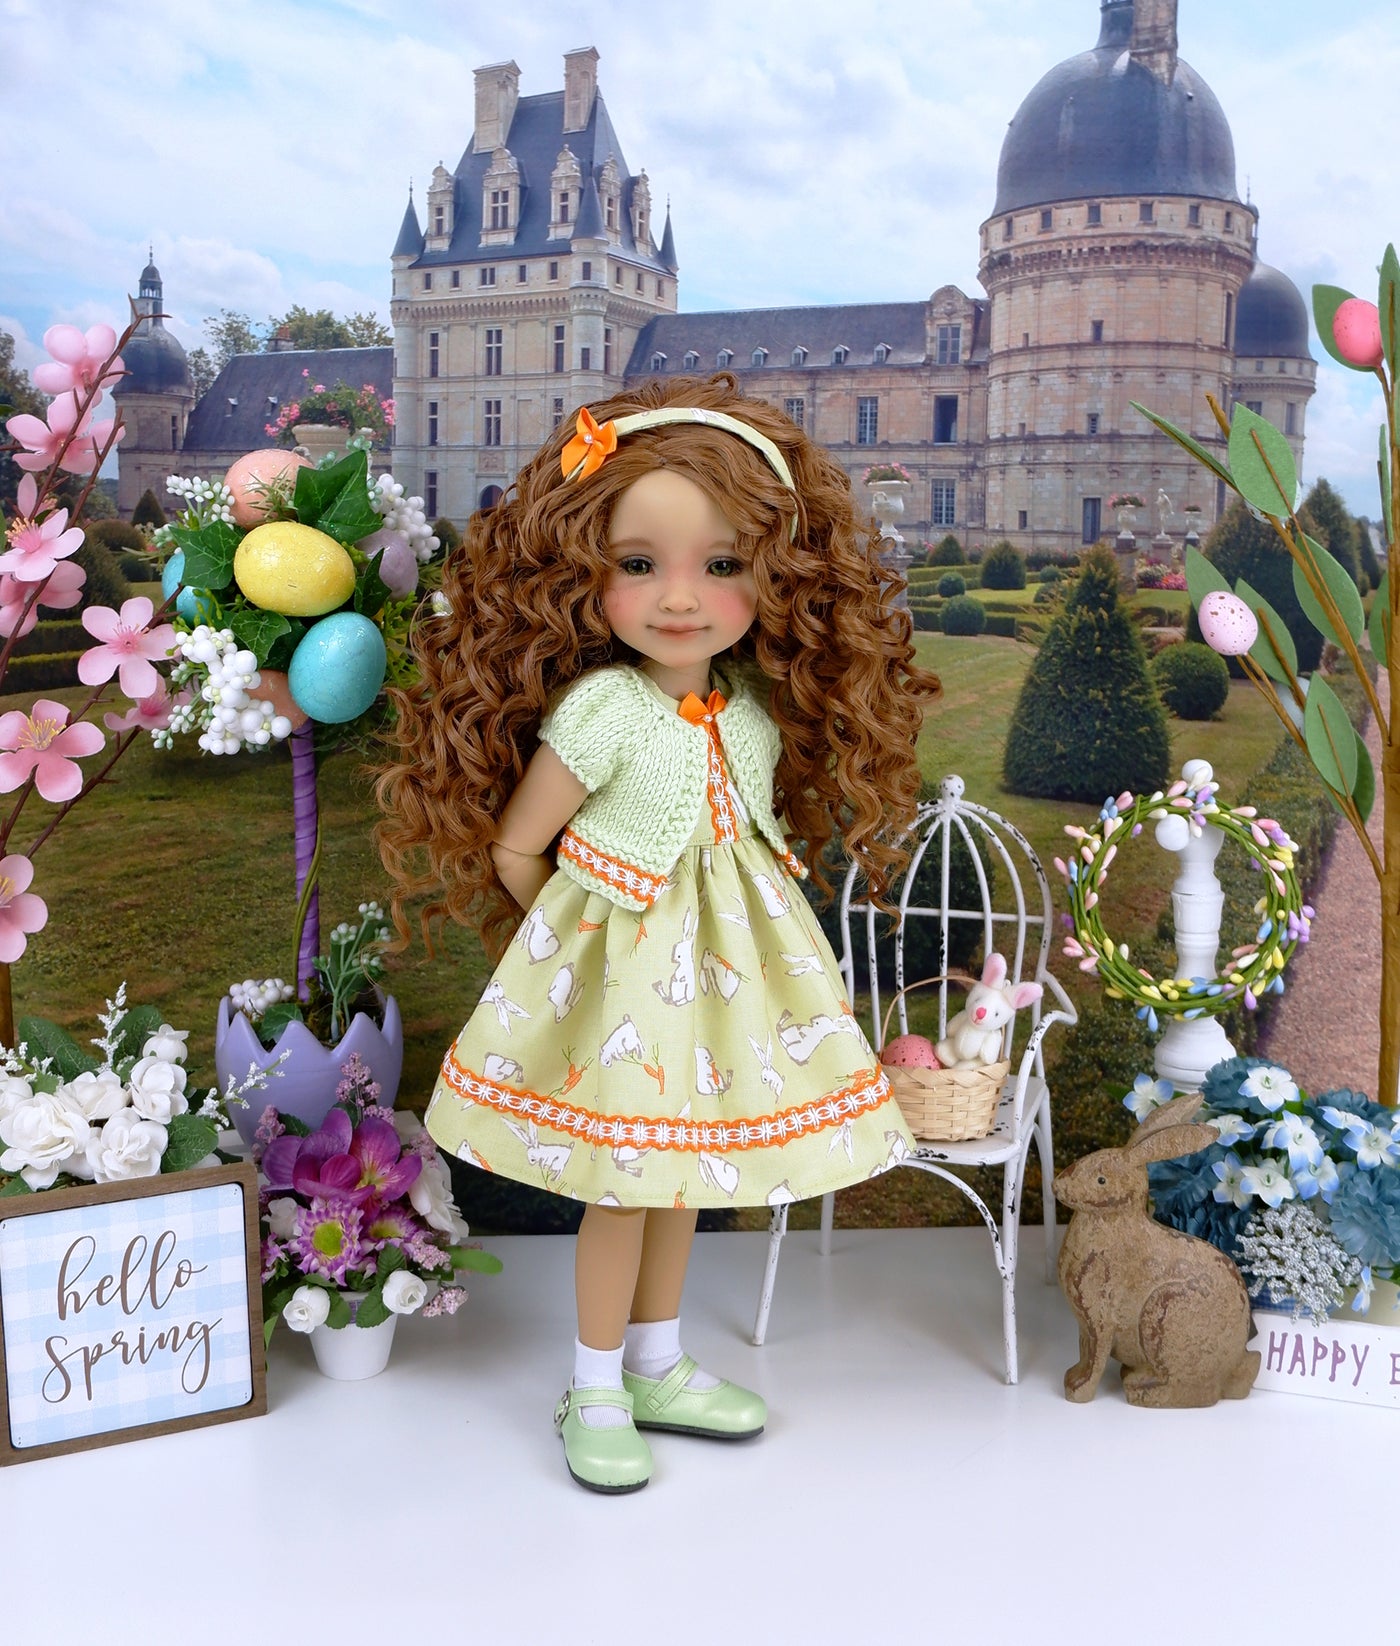 Little Garden Bunny - dress and sweater with shoes for Ruby Red Fashion Friends doll